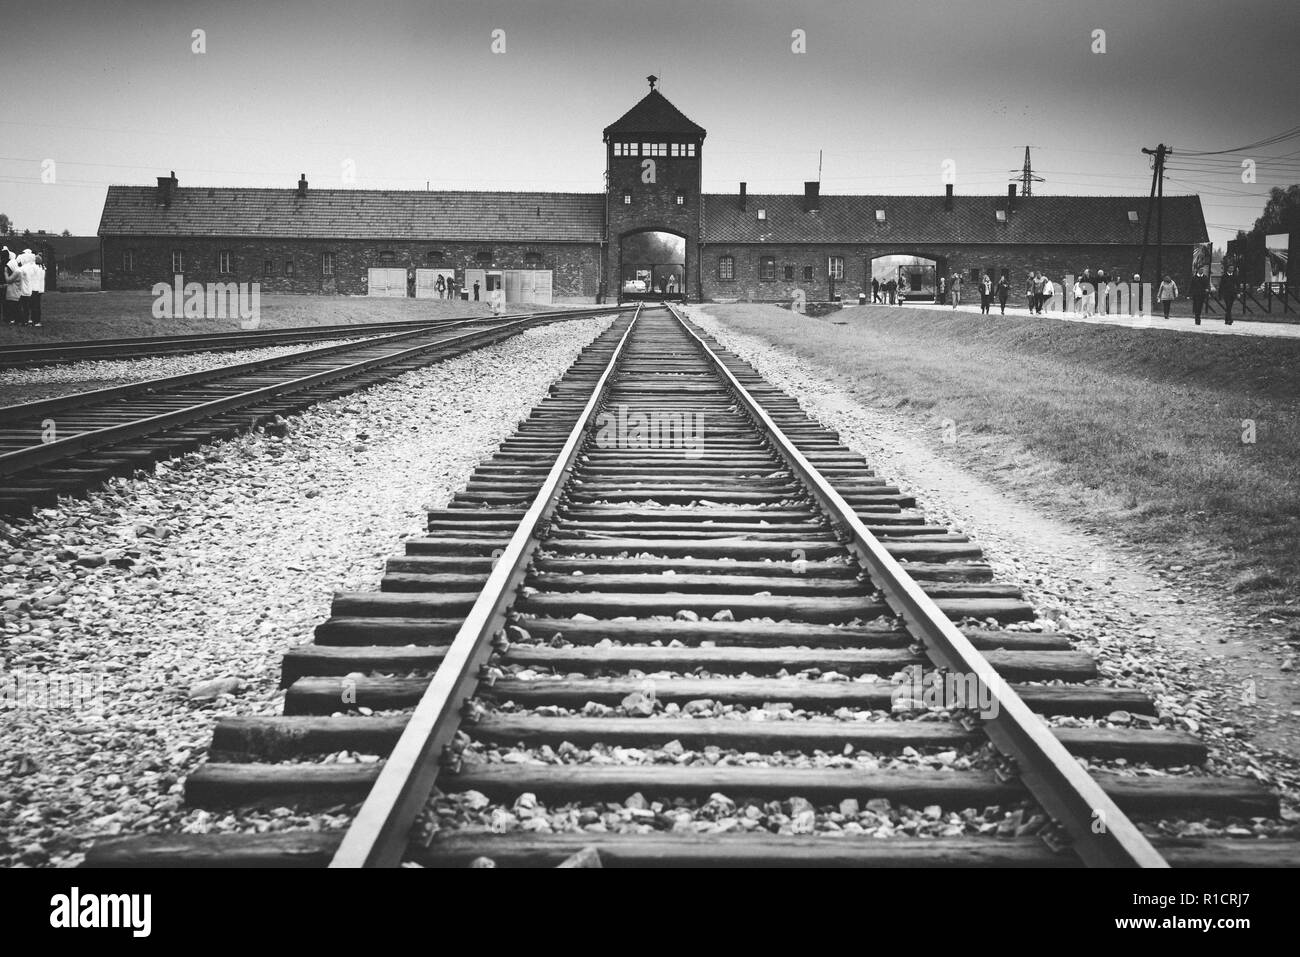 Auschwitz II Birkenau, Nazi concentration and extermination camp. Rail entrance to concentration camp at Auschwitz Birkenau. Auschwitz, German-occupie Stock Photo